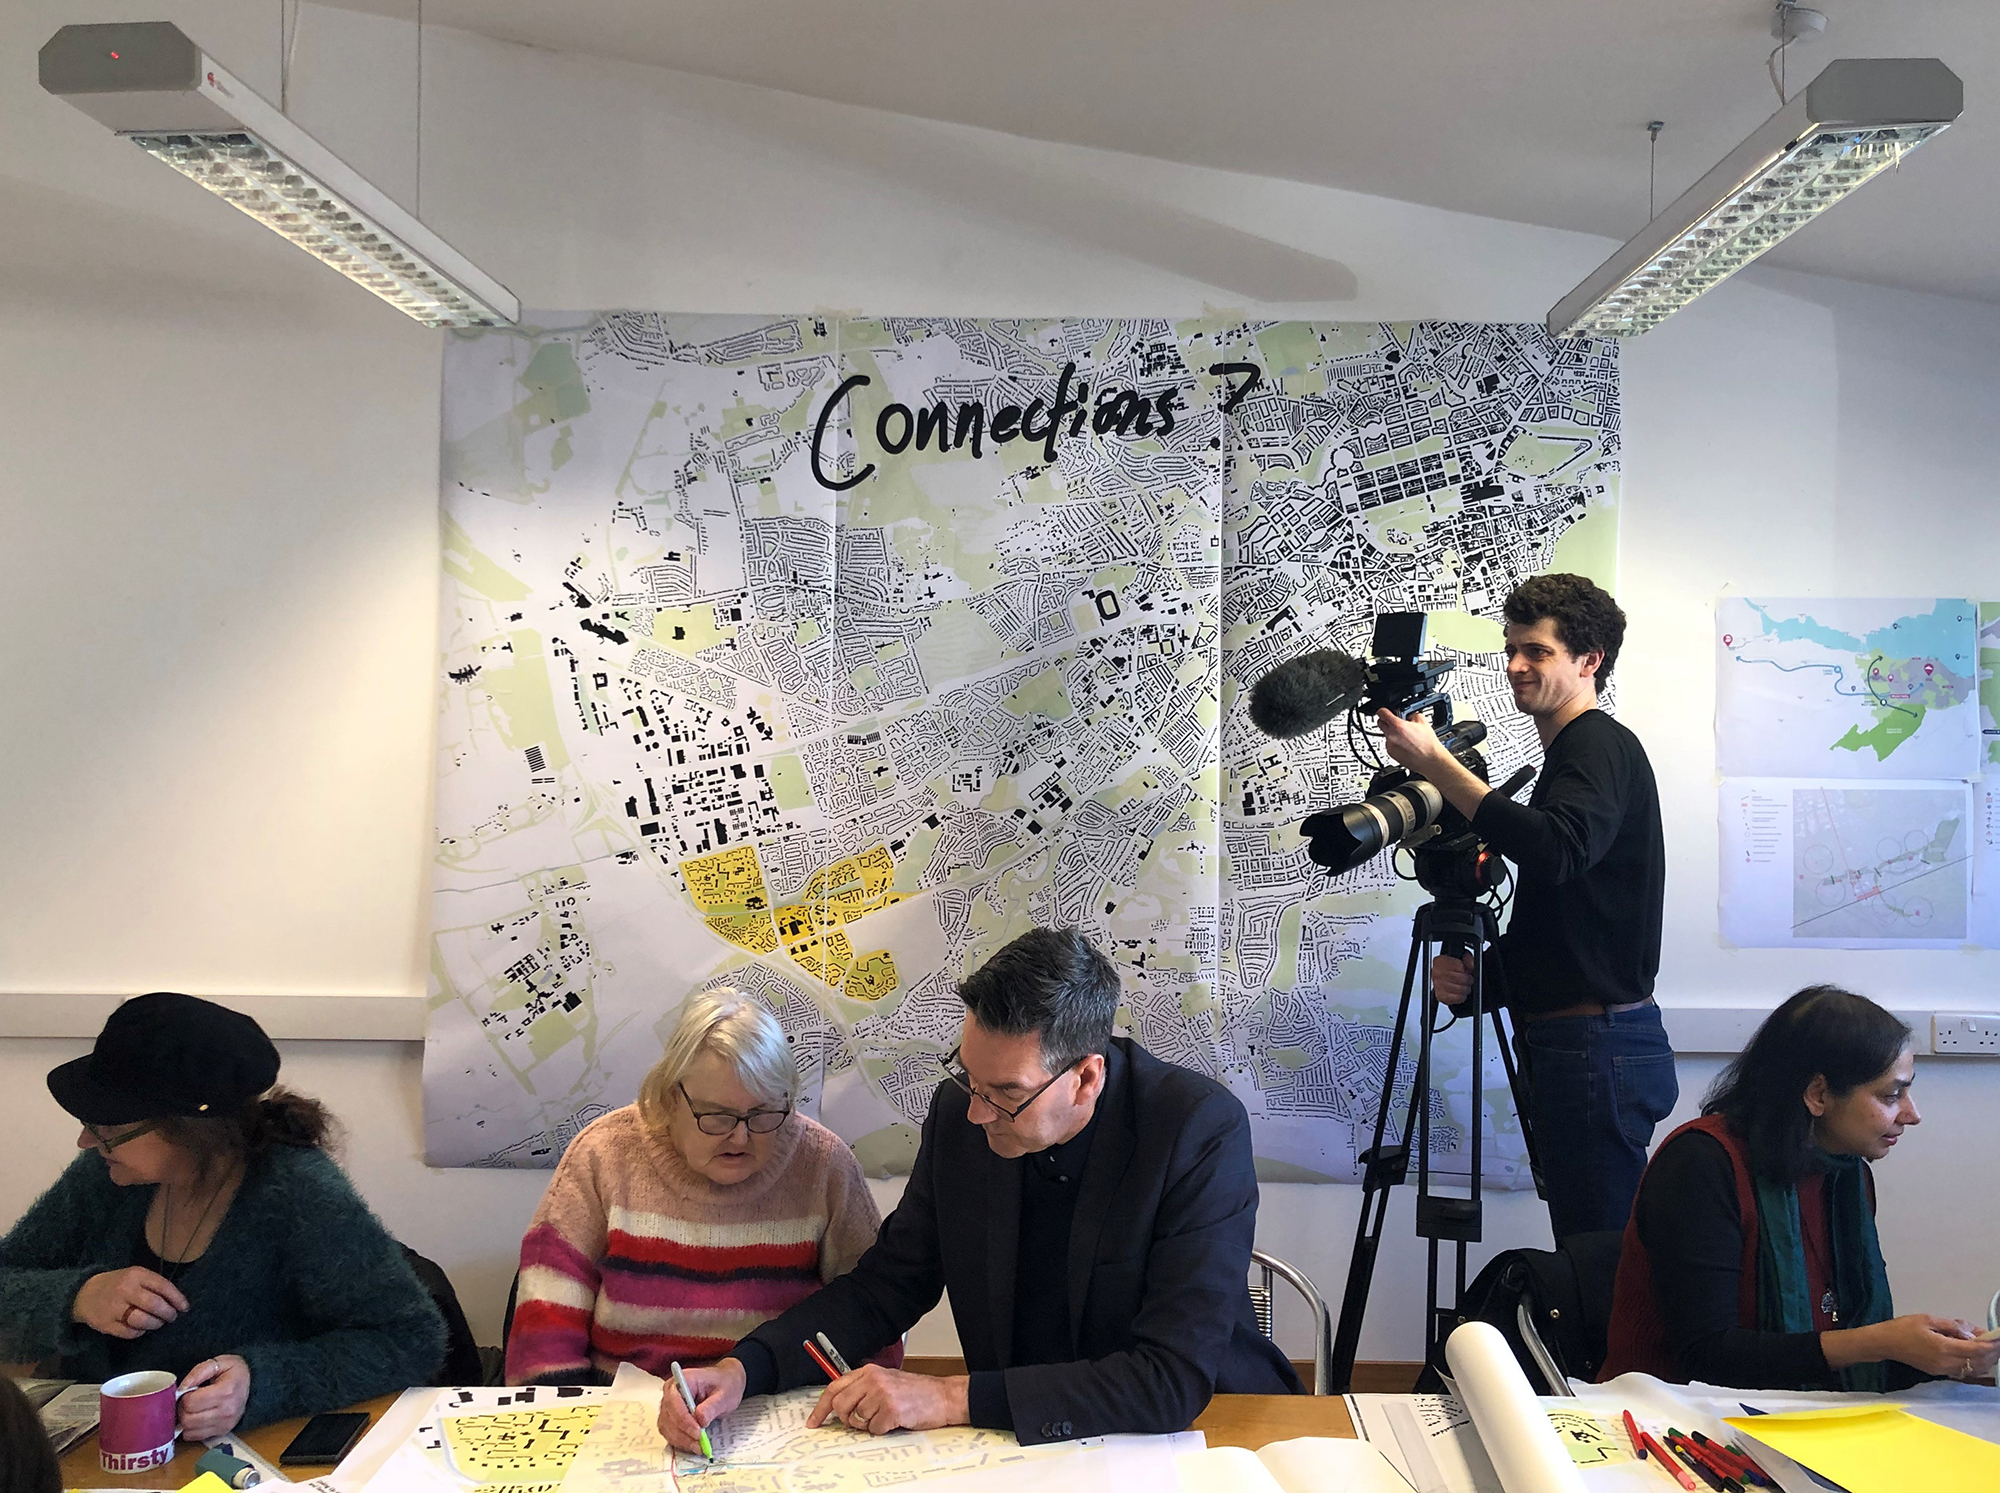 Two people sit at a table sketching on a large piece of paper. There is a person with a video camera in the background, and a large map pinned to the wall.